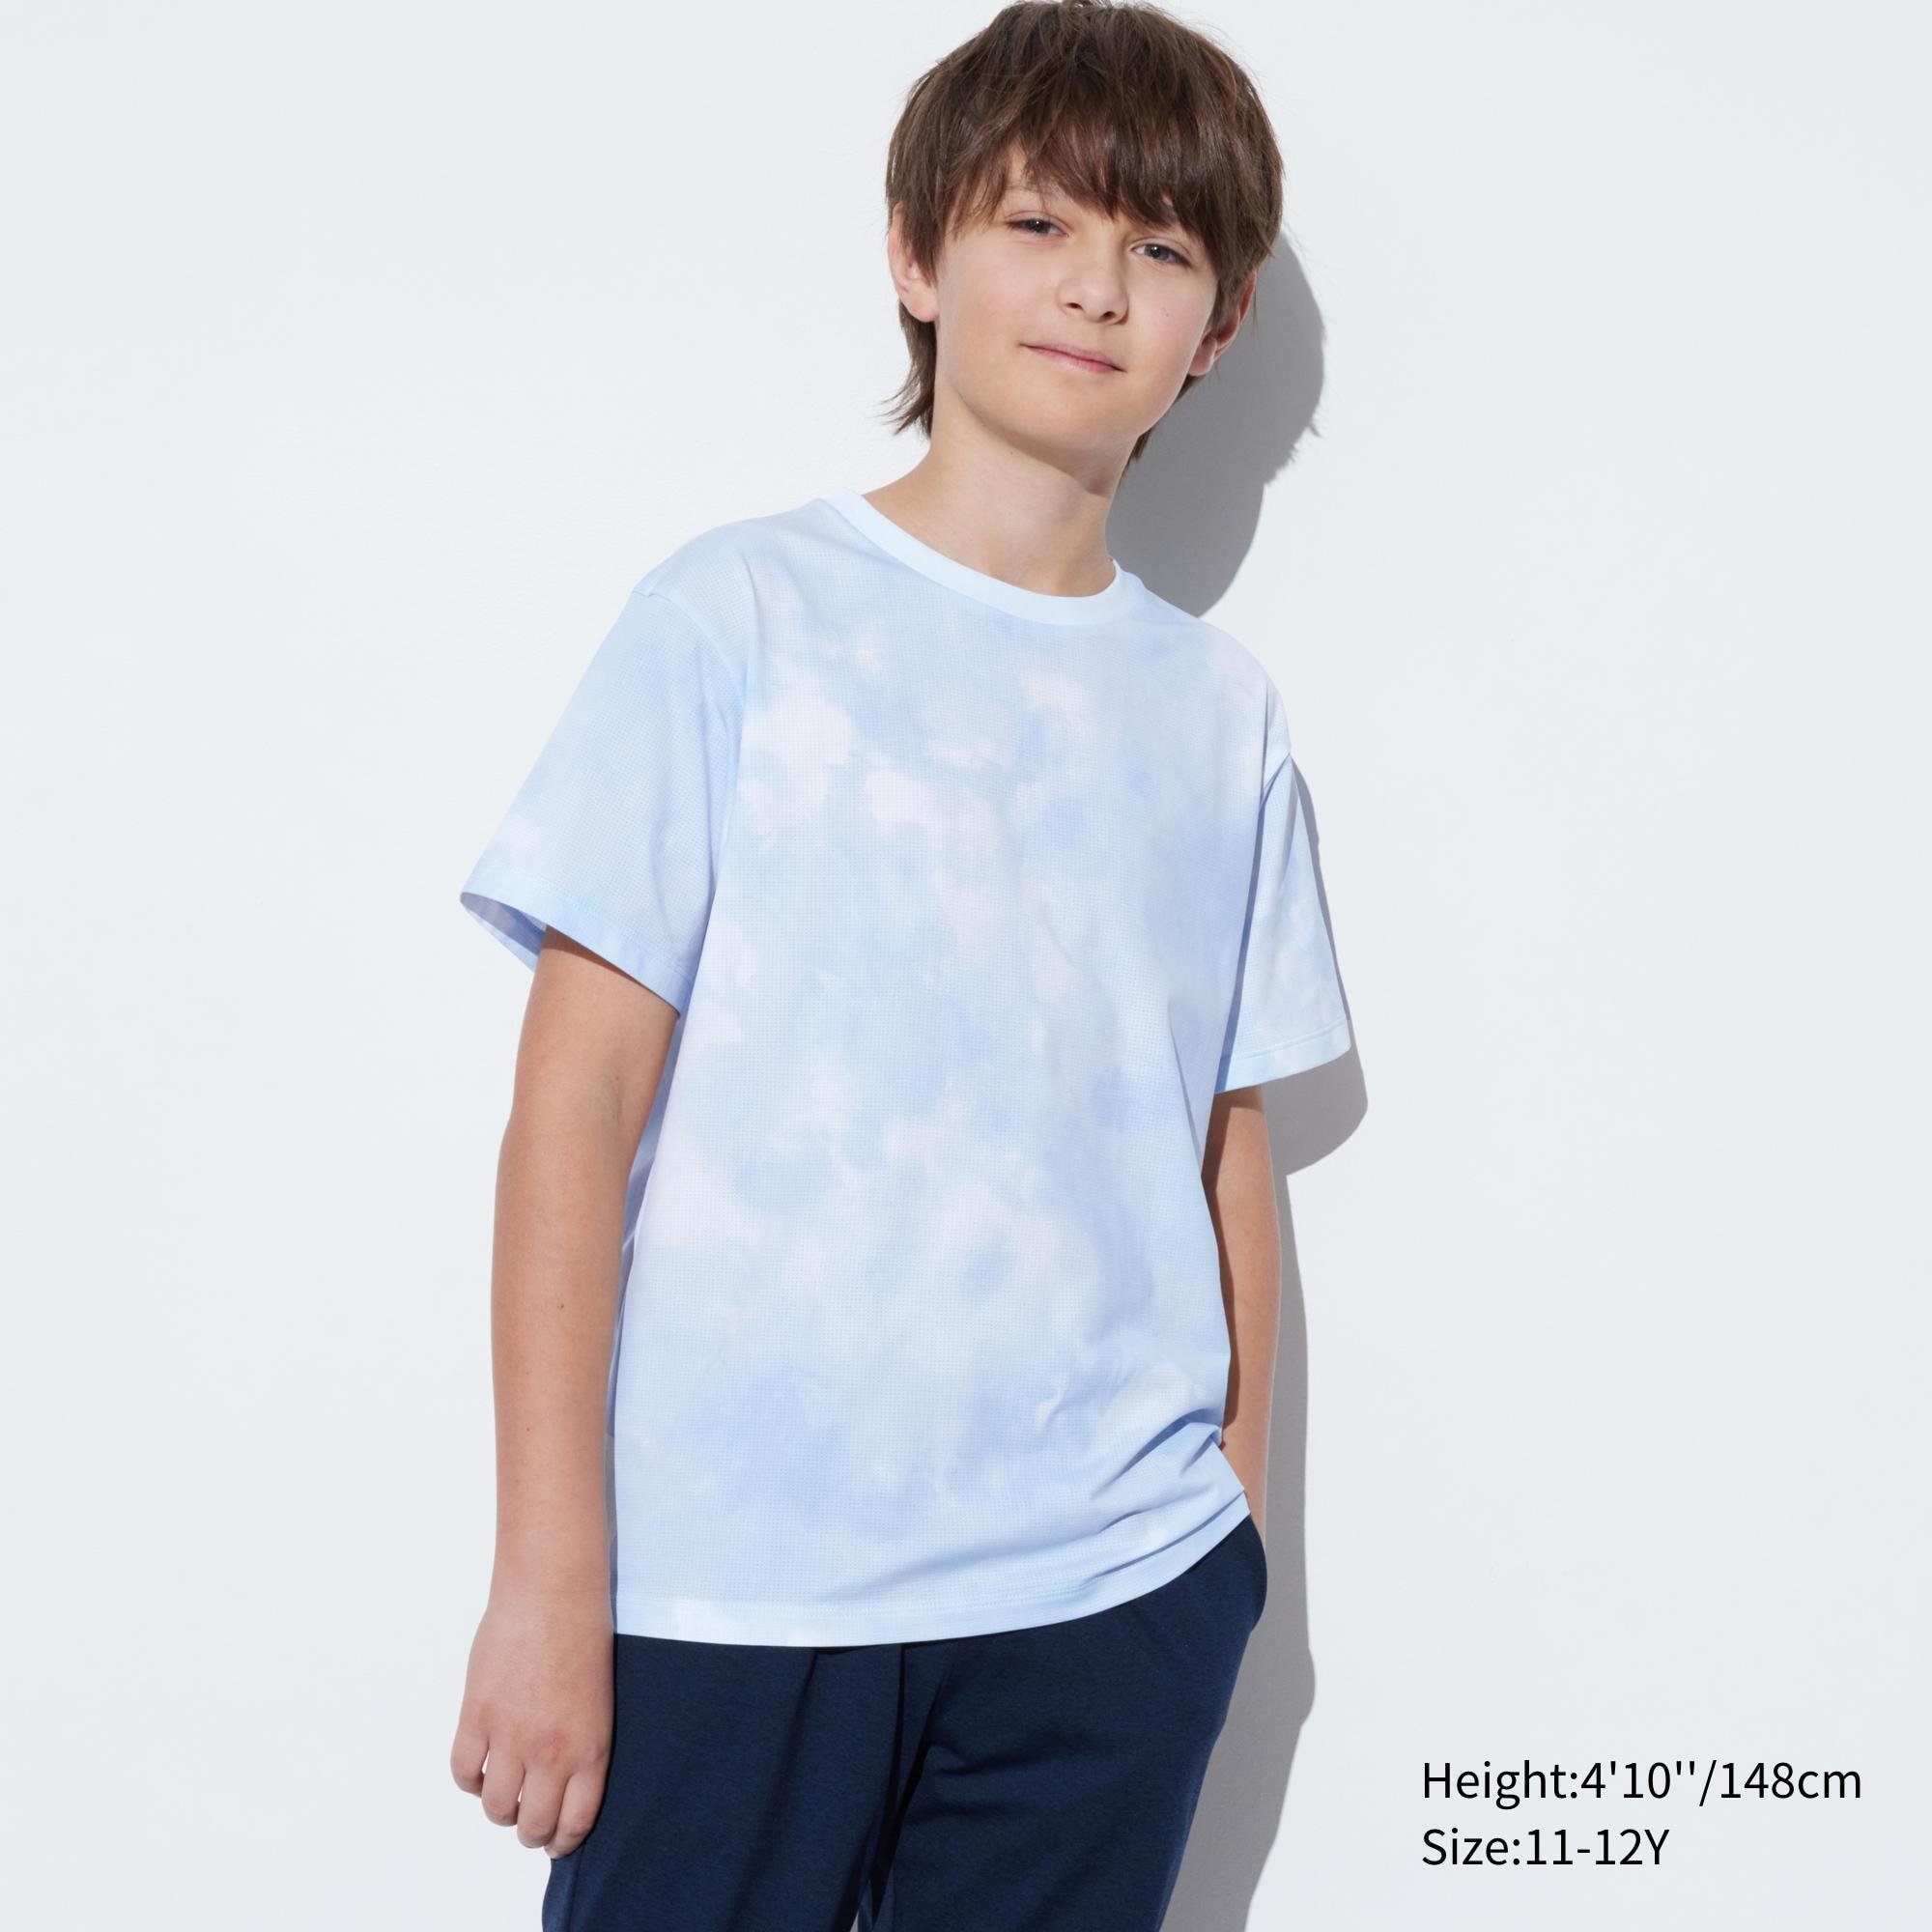 Ultra Stretch DRY-EX Crew Neck Short Sleeve T-Shirt by UNIQLO